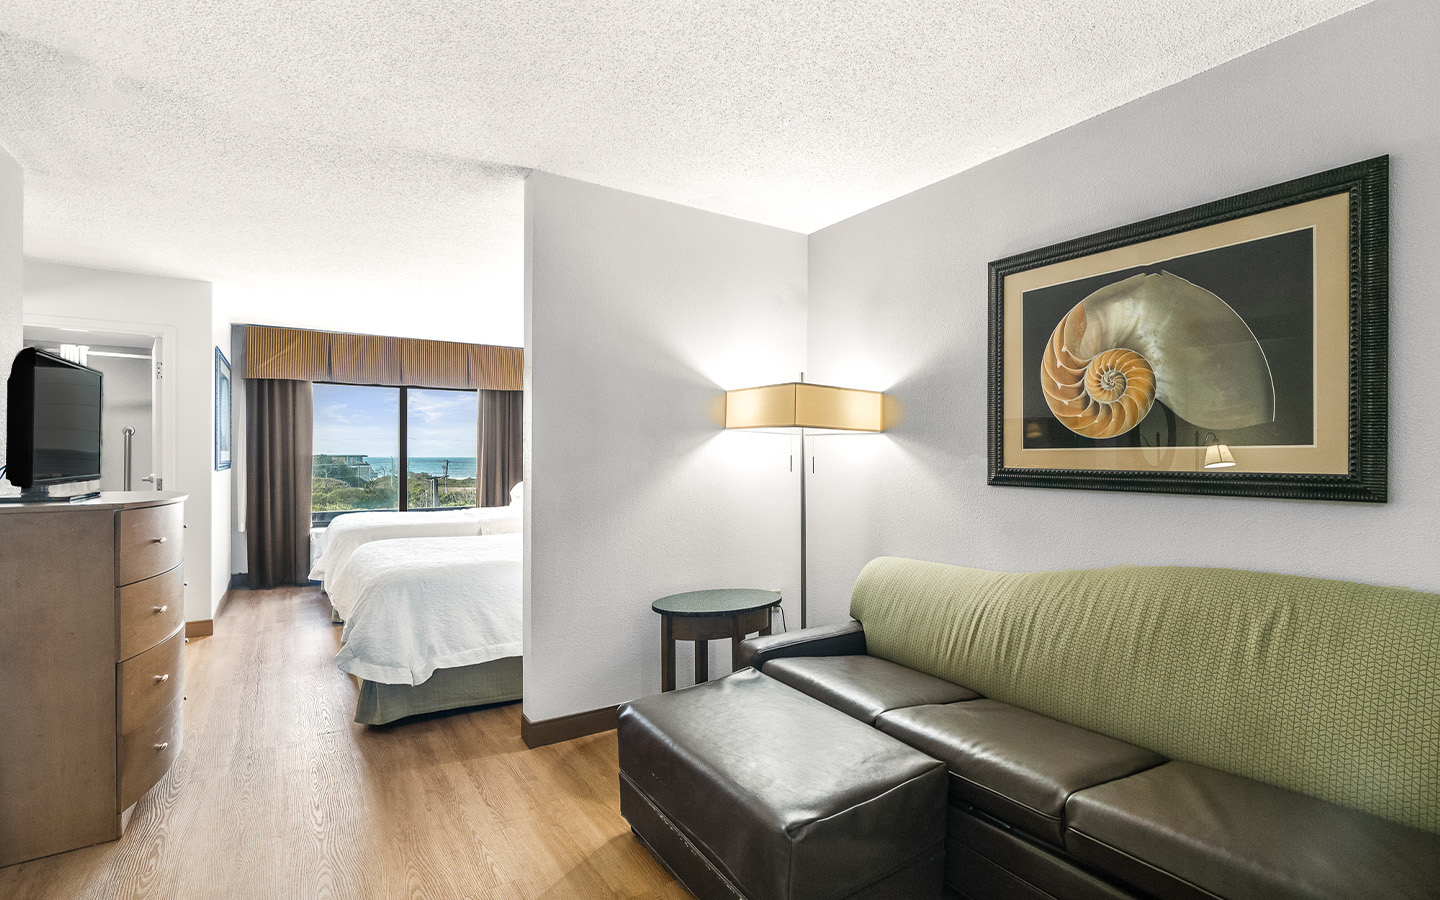 Enjoy the breathtaking views from our Comfortable Guest Room